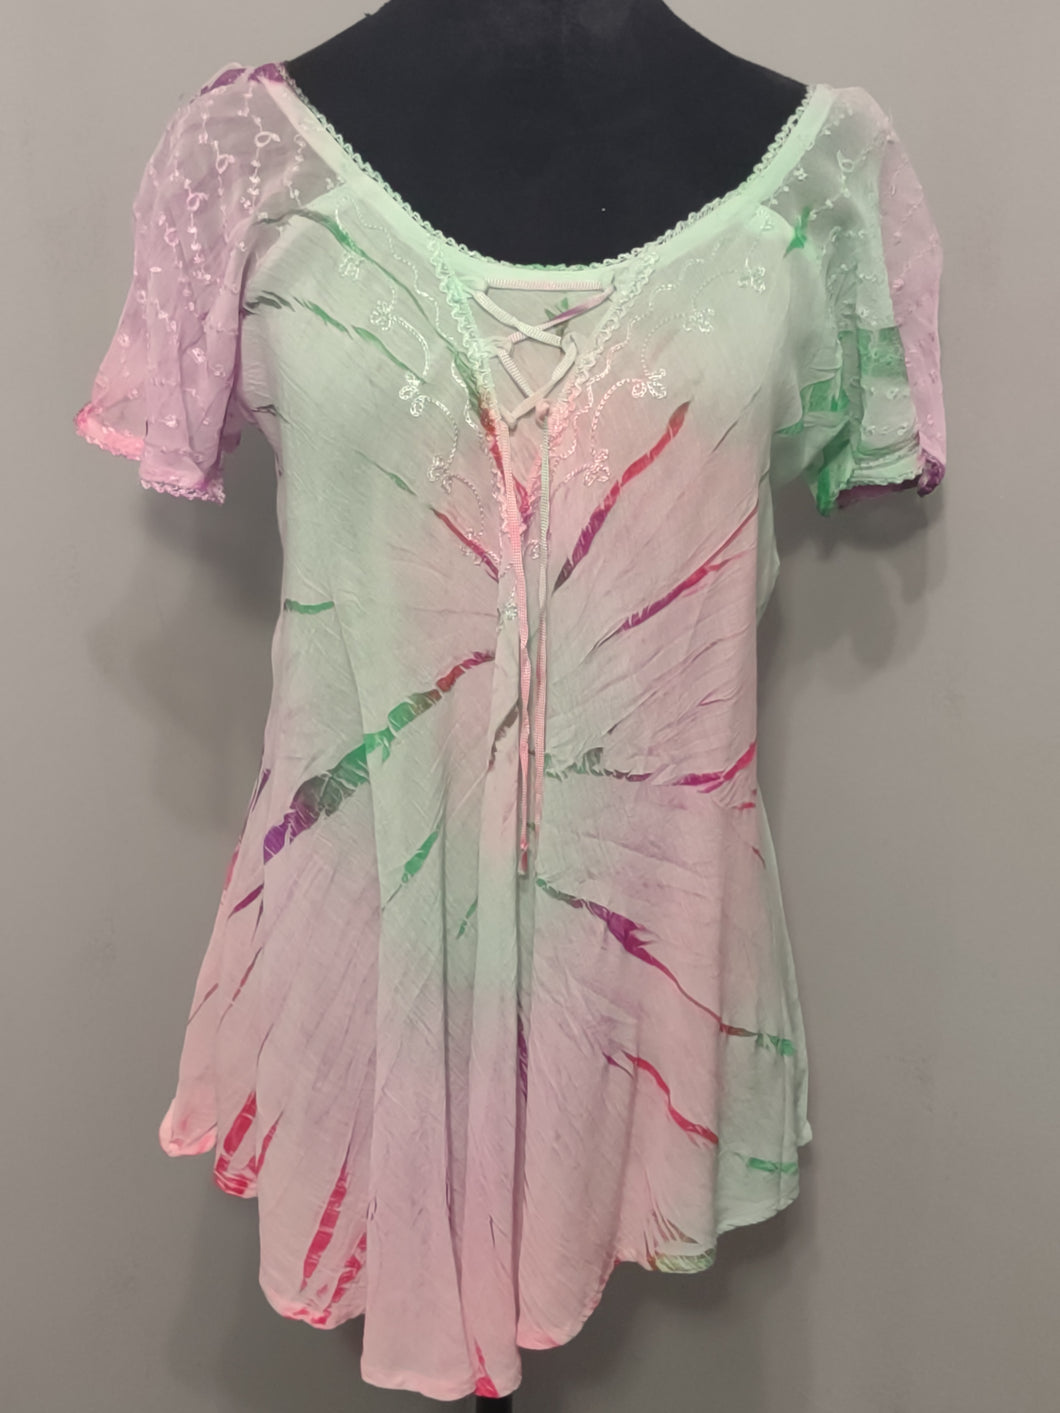 Neon Tye Dyed Short Sleeve Top - Kate's Candles Co.